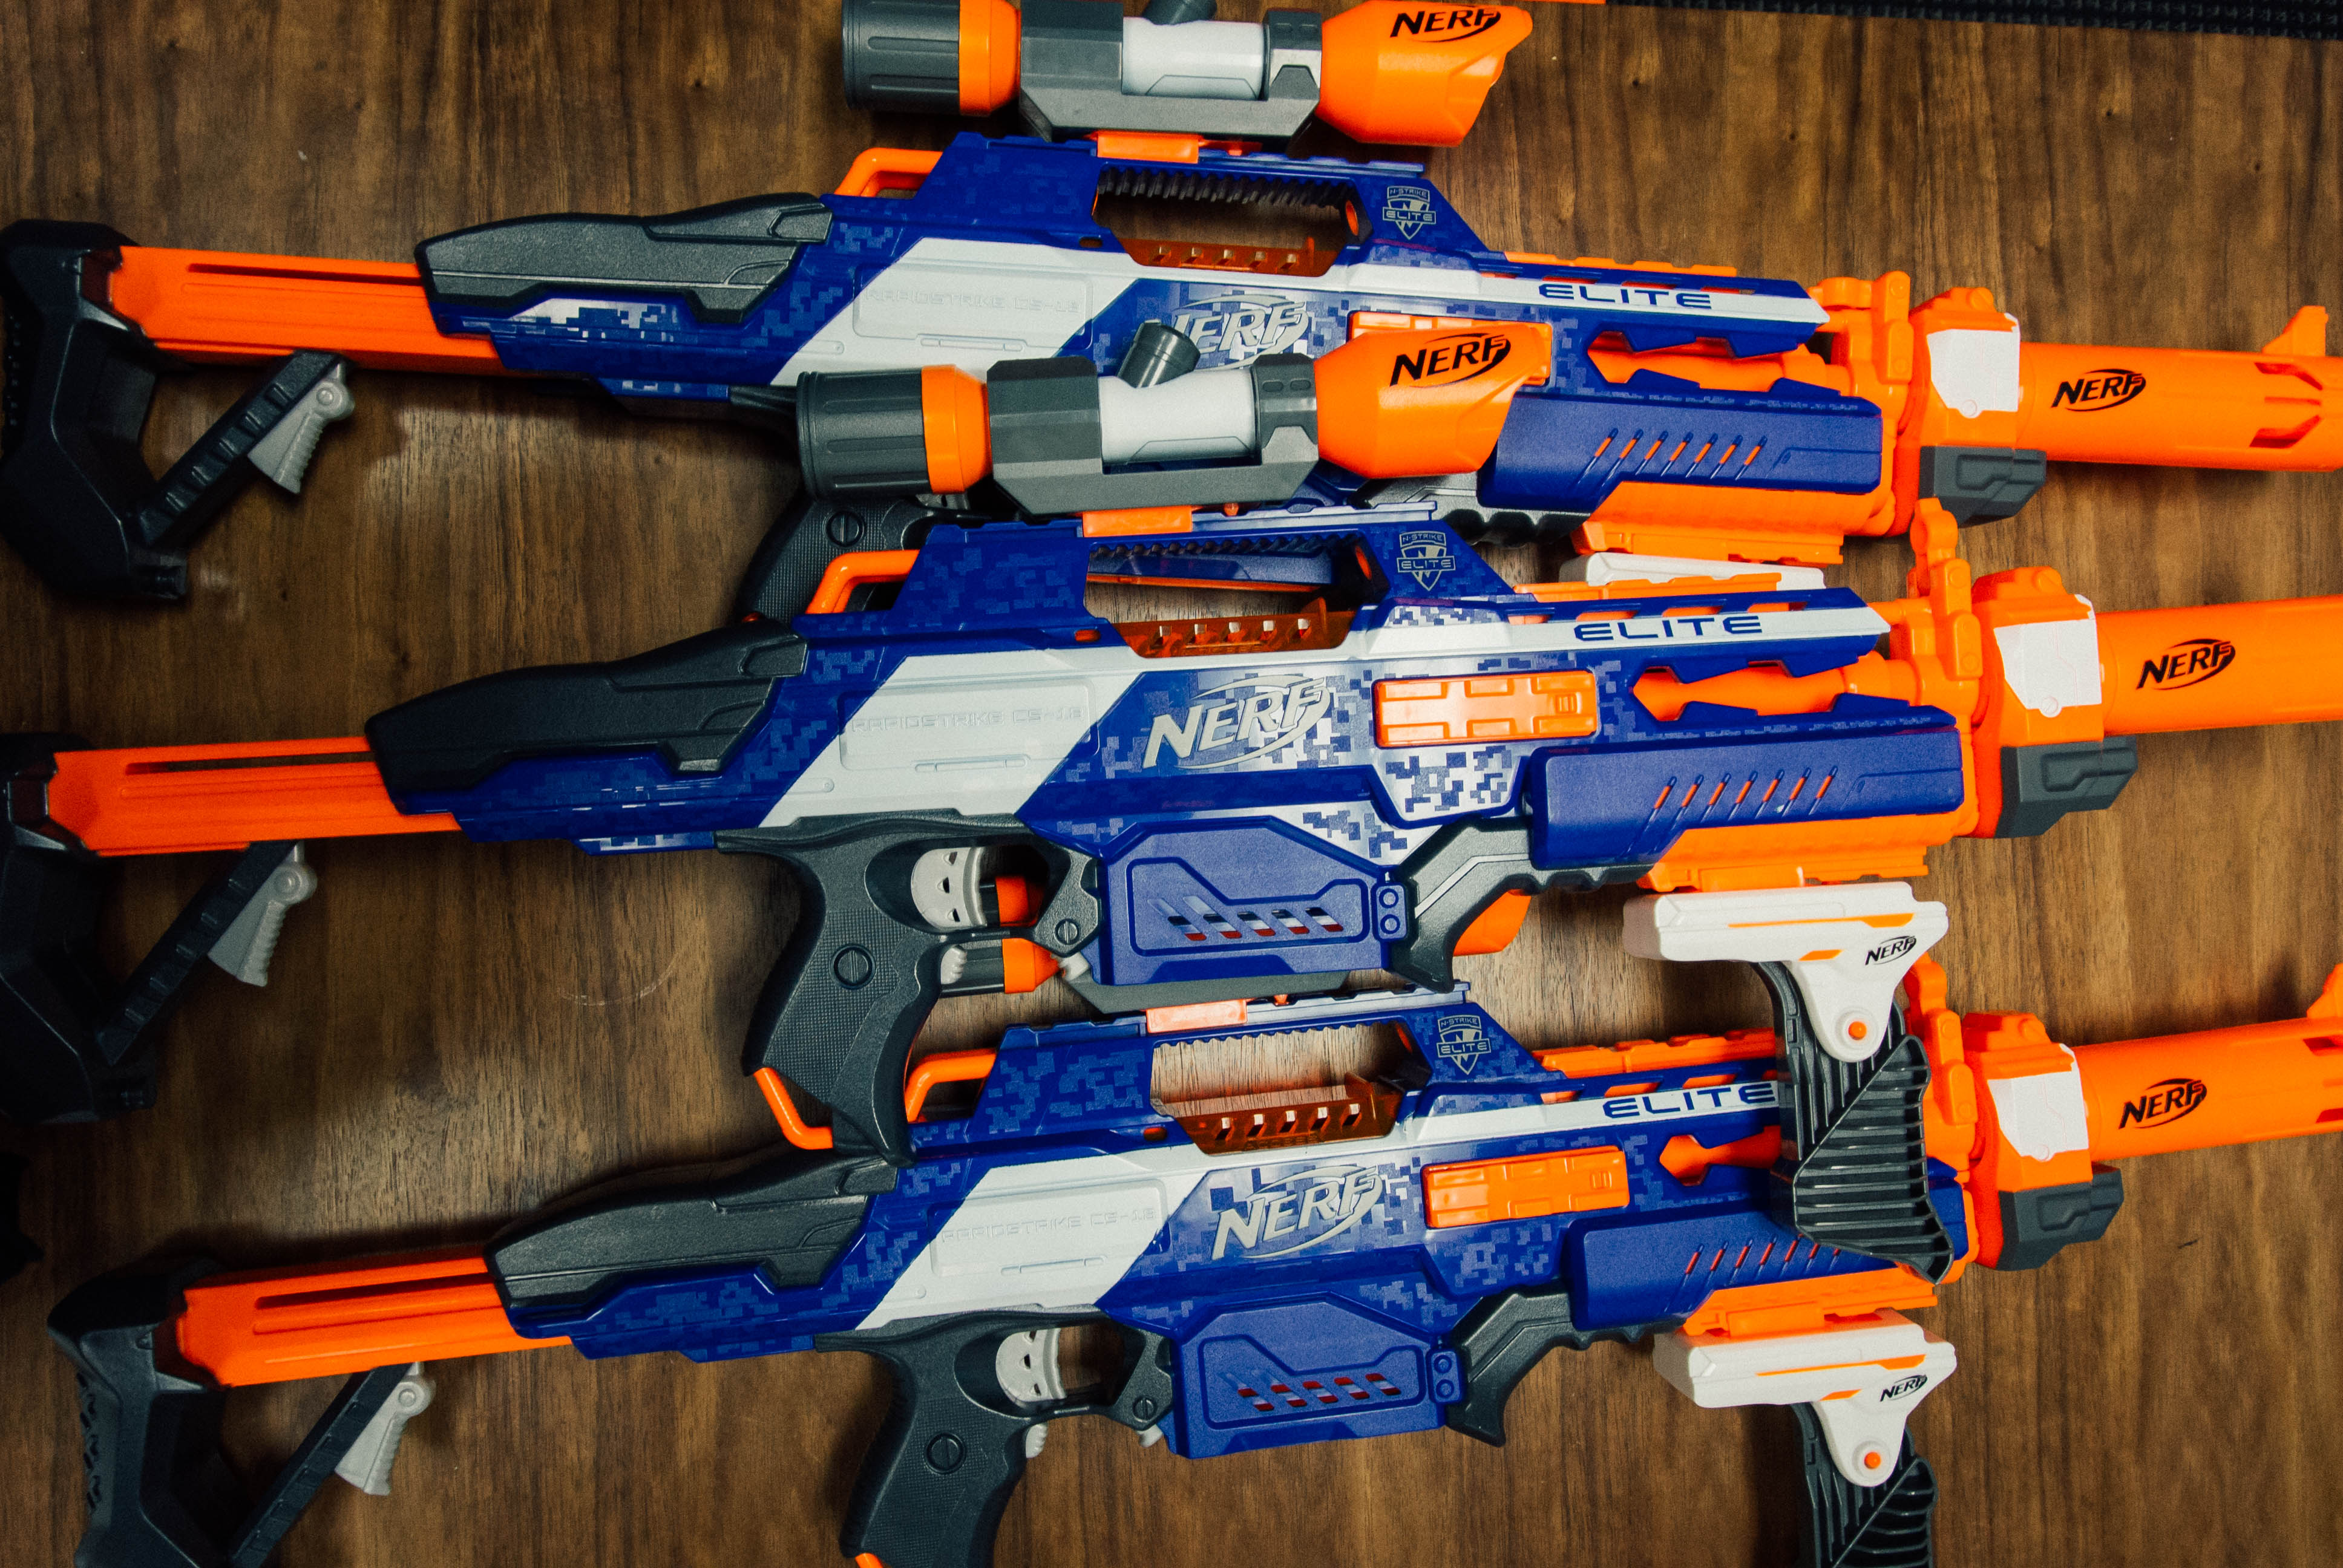 suge sandhed fusion Battle Universe on Twitter: "More new #Nerf guns! Which #Nerf gun is your  favorite? https://t.co/1BmnEoeQfq" / Twitter